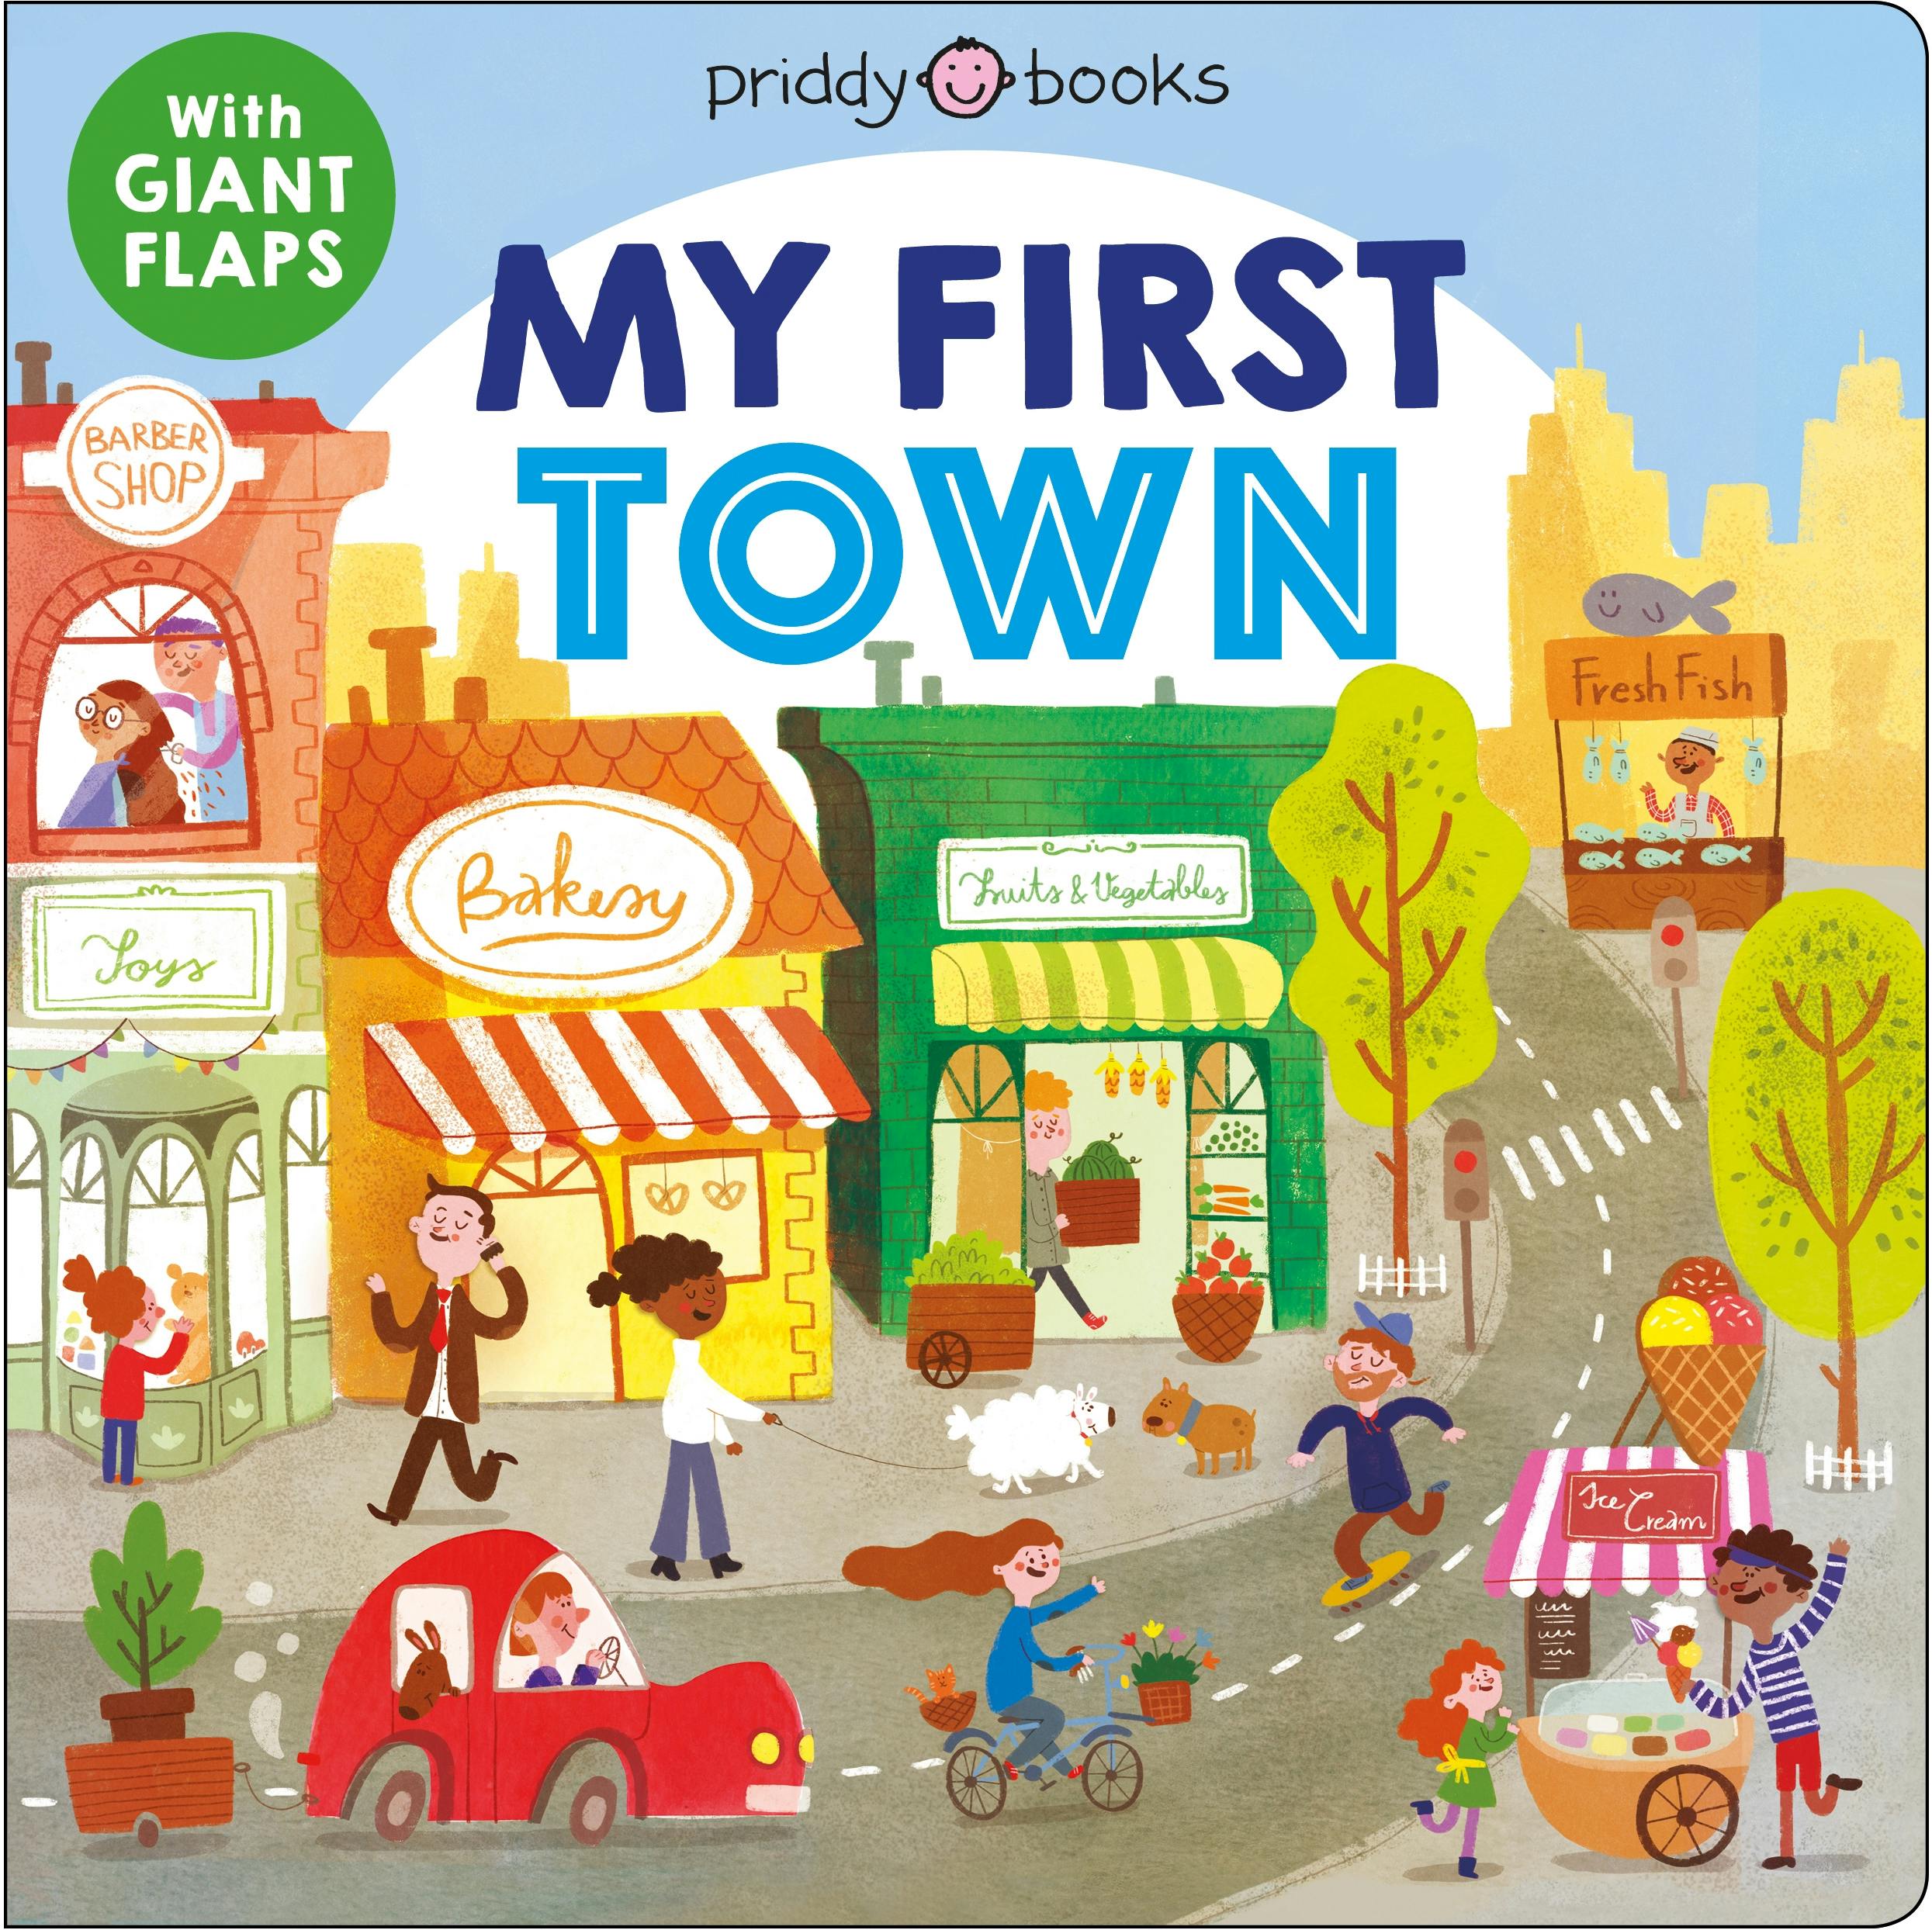 Town цена. My first book. Priddy Roger "my first Farm". My first book about. Places in Town.